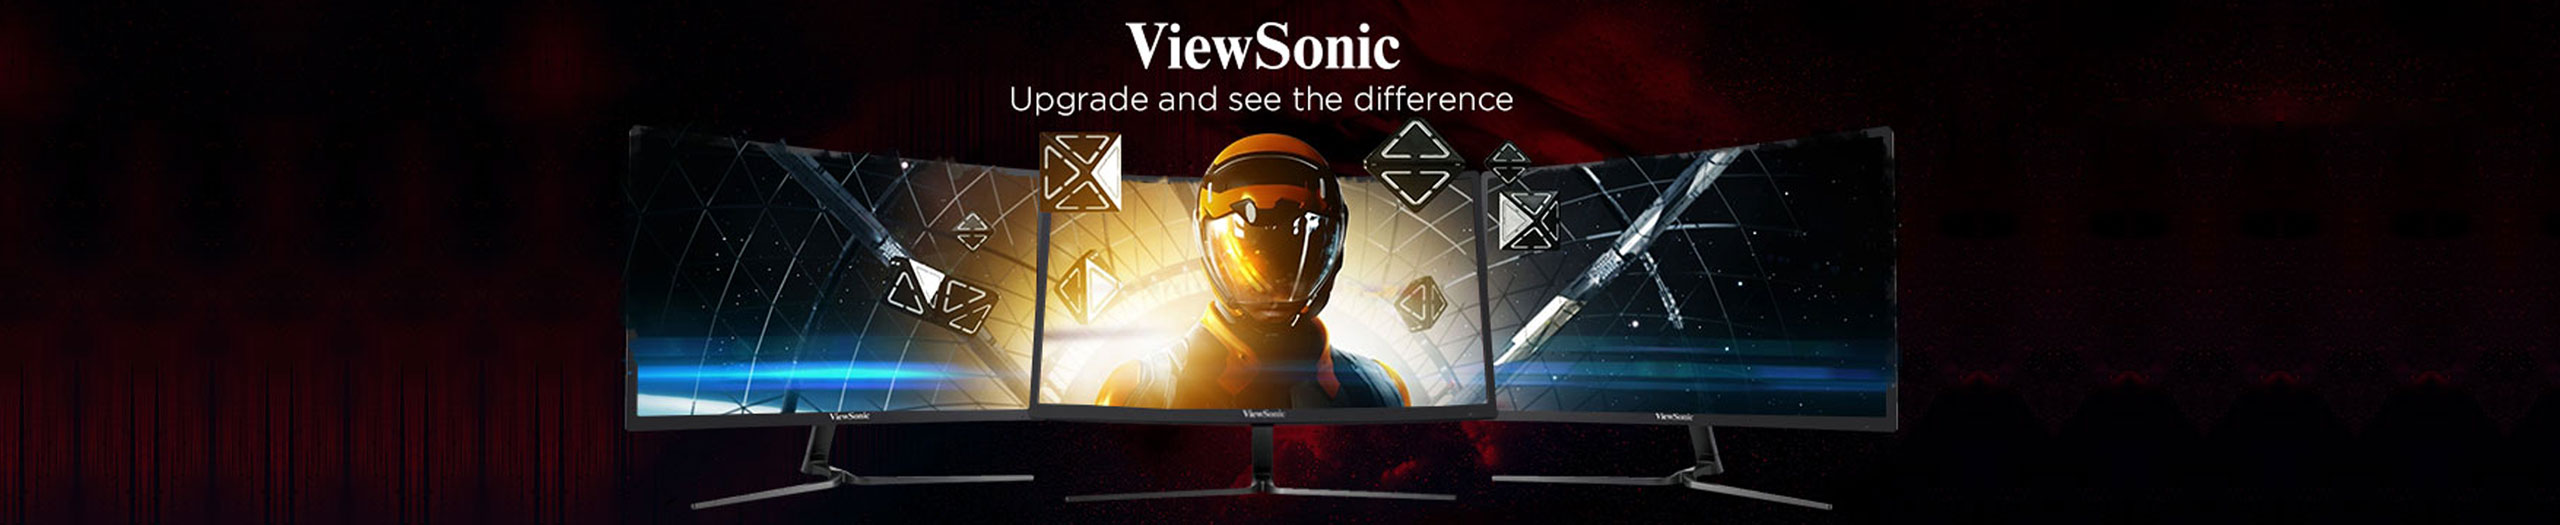 Best ViewSonic Gaming Monitor Deals in South Africa
